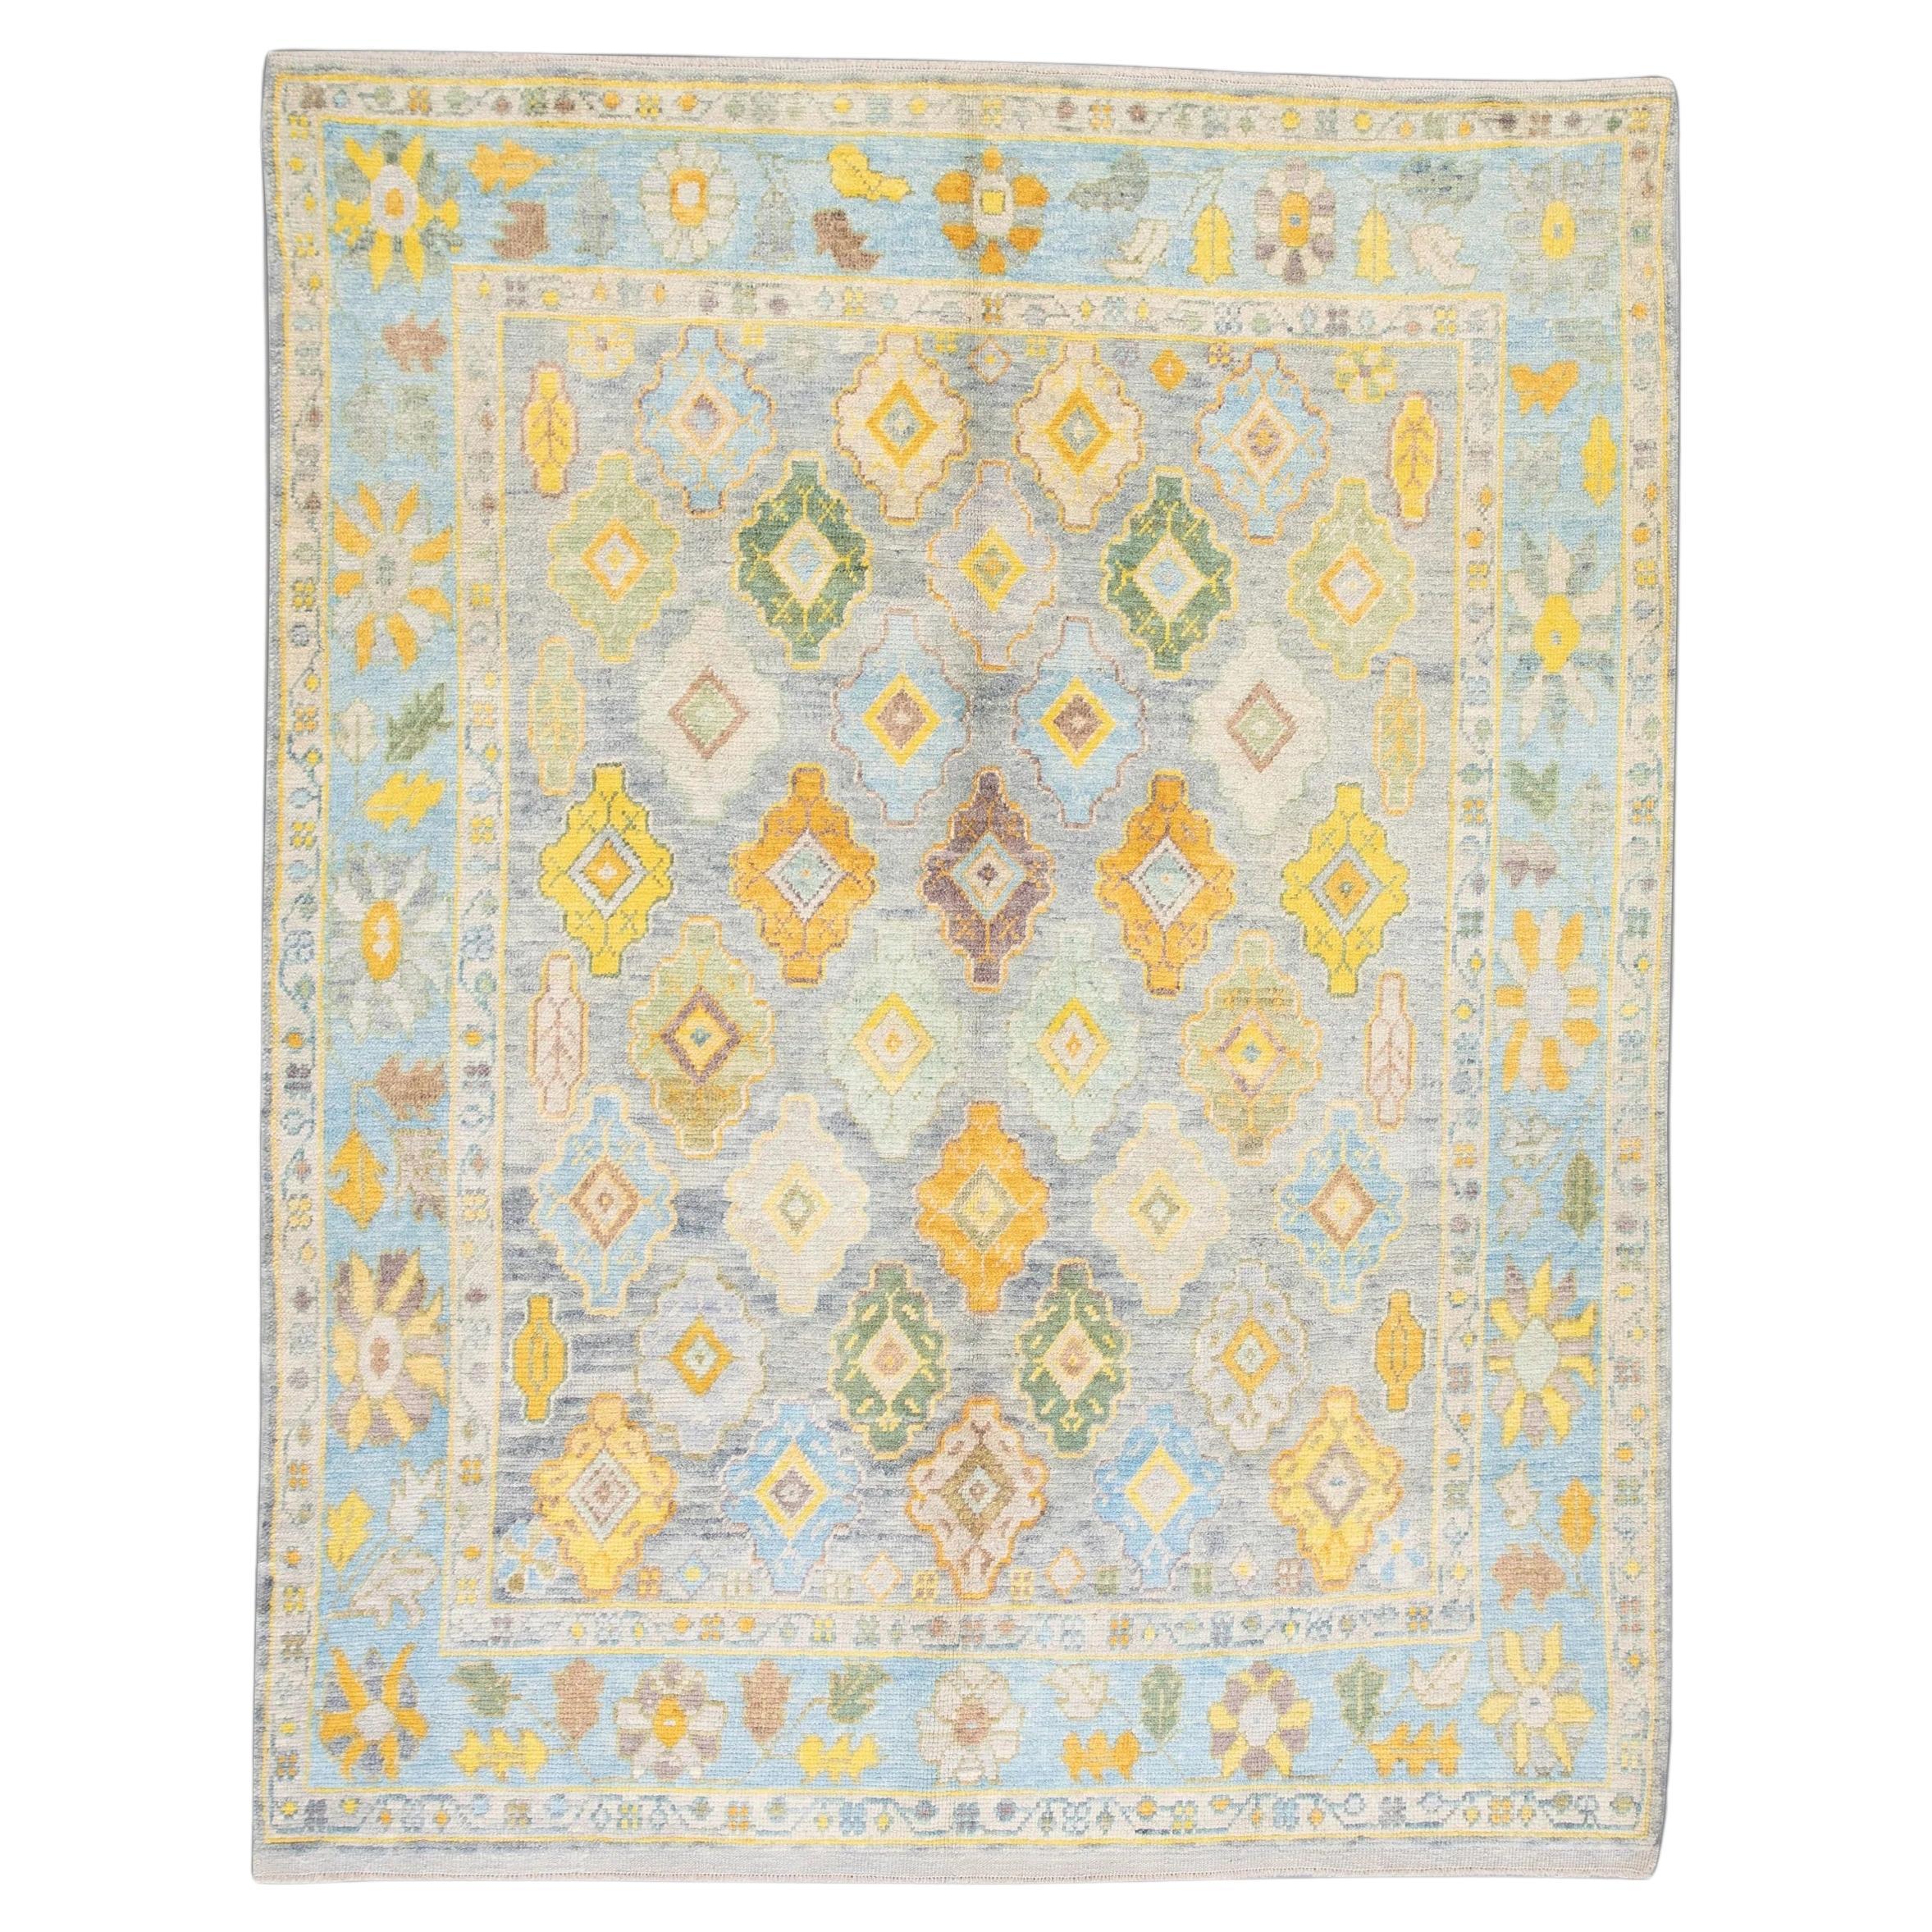 Handwoven Wool Floral Turkish Oushak Rug in Blue, Green, and Yellow 8'1" x 9'10" For Sale